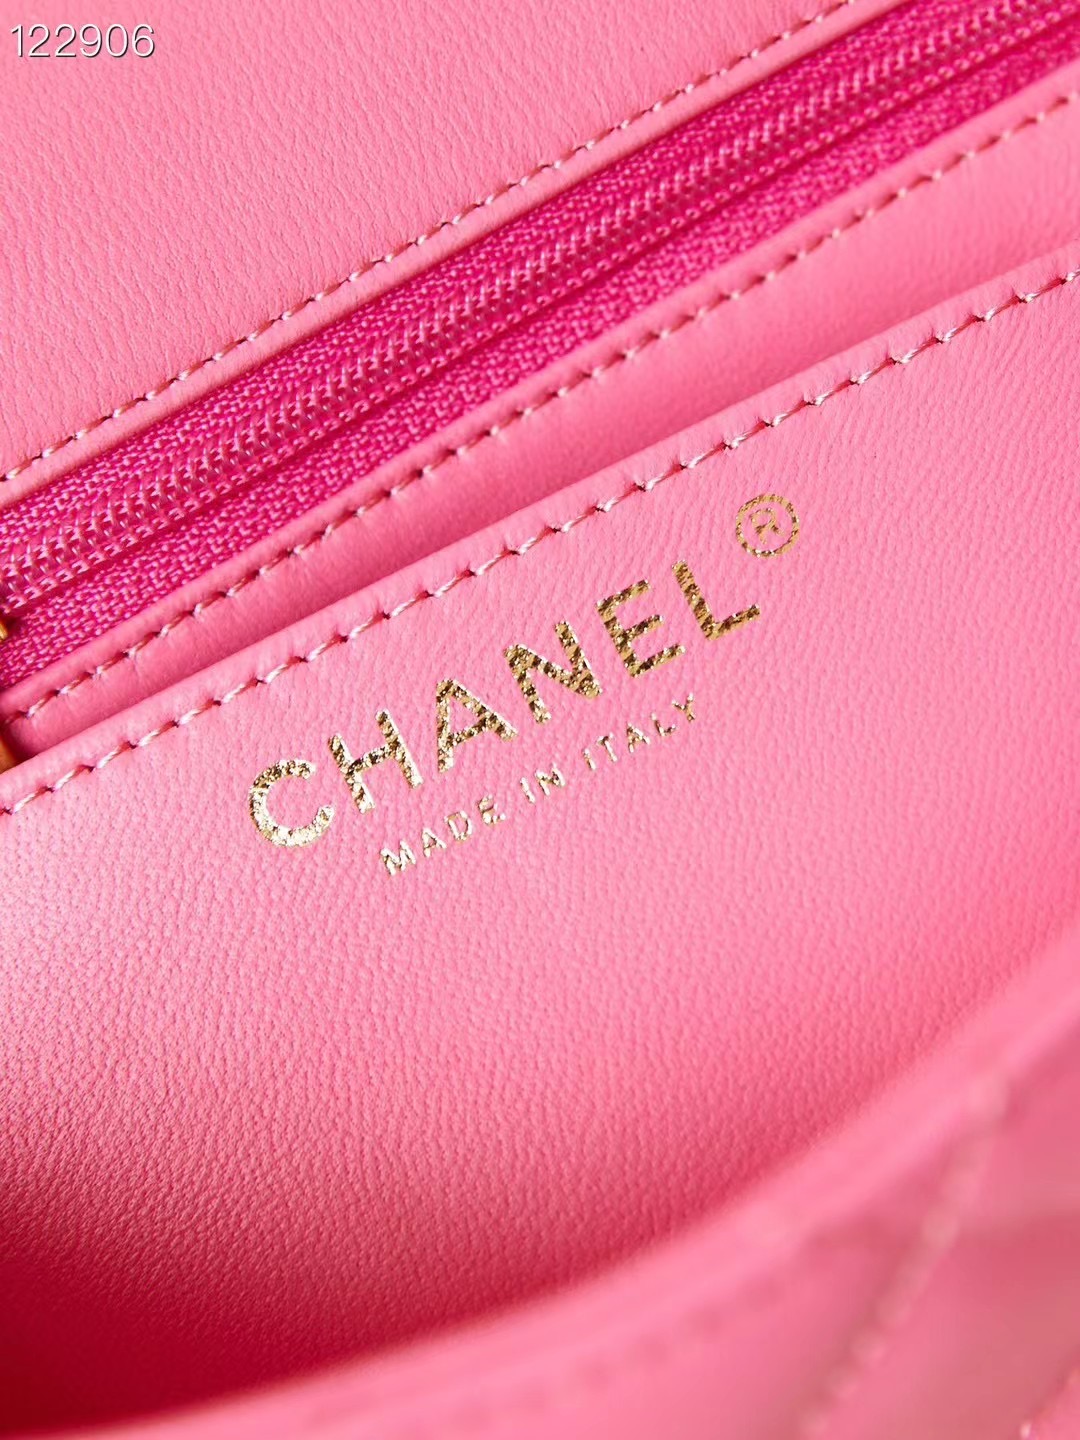 Chanel SMALL FLAP BAG AS4384 rose